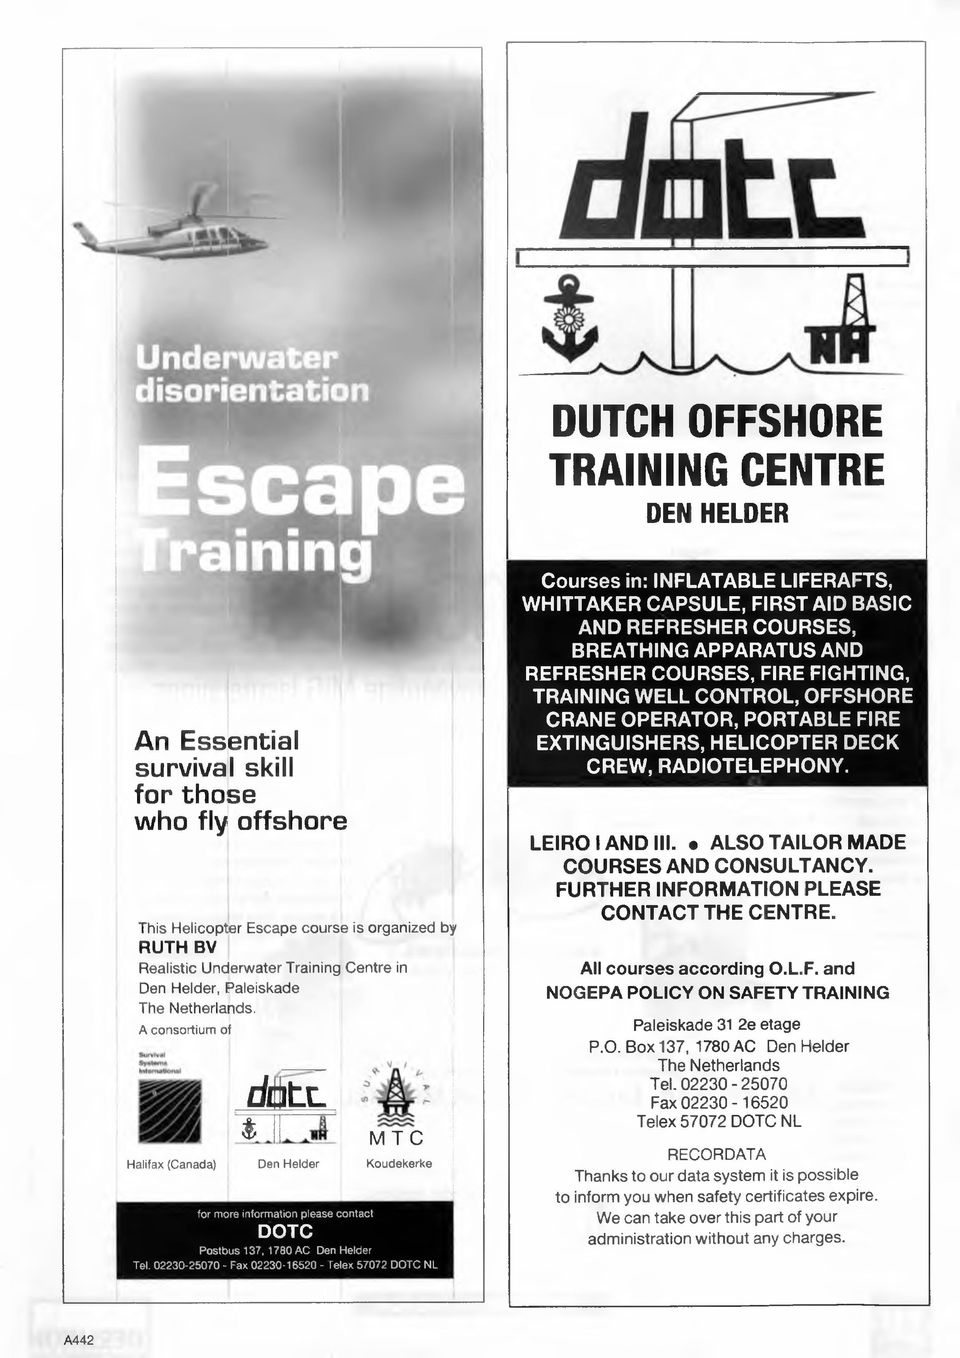 02230-25070 - Fax 02230-16520 - Telex 57072 DOTC NL Courses in: INFLATABLE LIFERAFTS, WHITTAKER CAPSULE, FIRST AID BASIC AND REFRESHER COURSES, BREATHING APPARATUS AND REFRESHER COURSES, FIRE